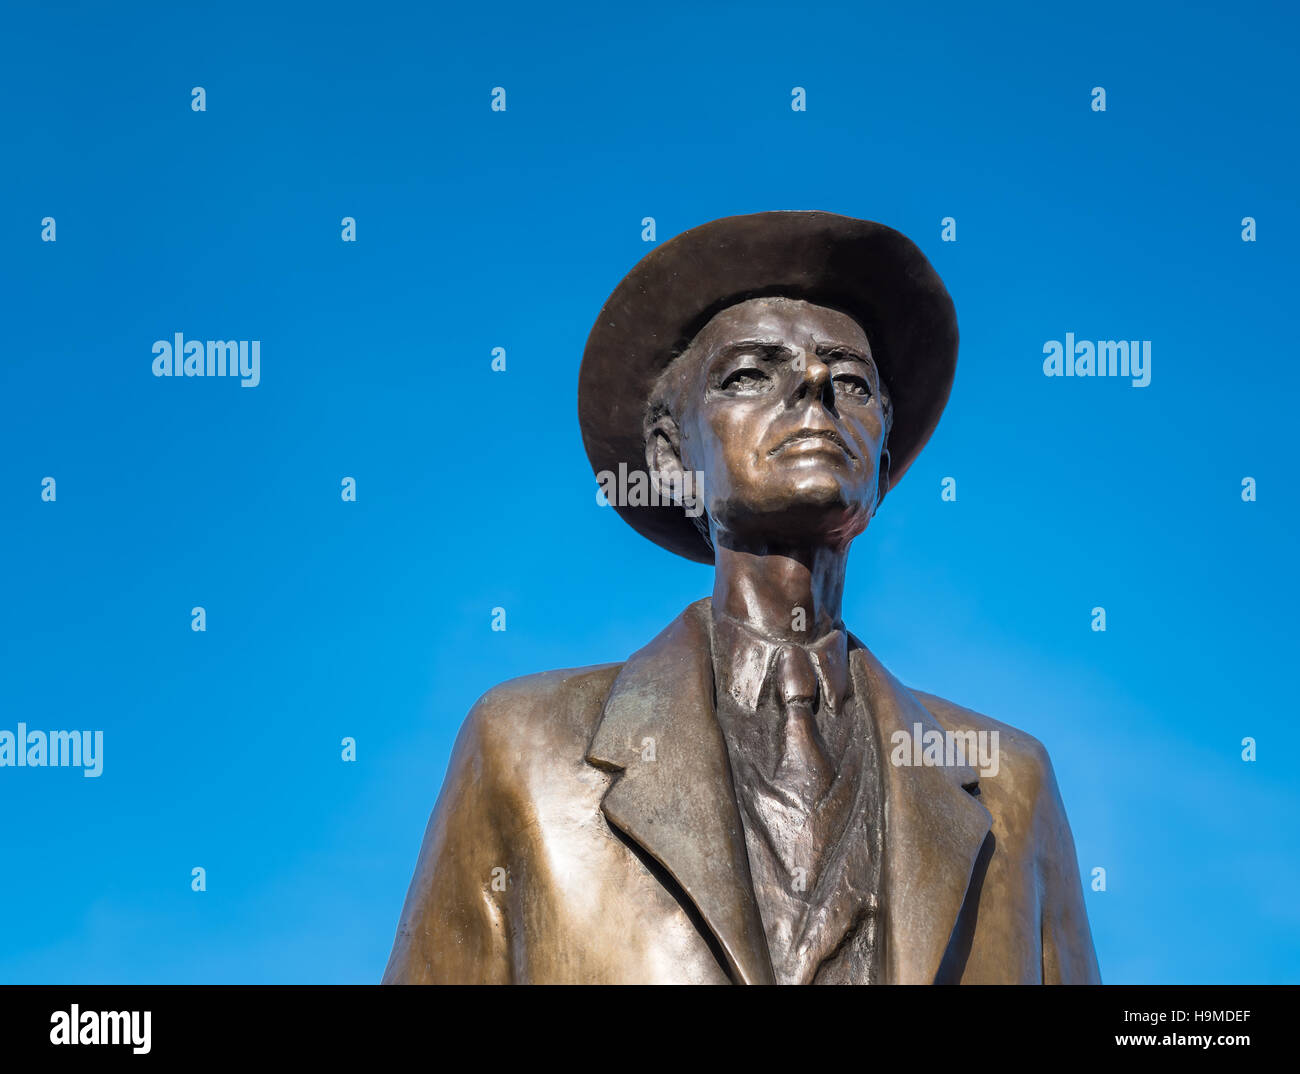 A statue of Bela Bartok (1881-1945) the Hungarian composer and pianist by sculptor Imre Varga. *EDITORIAL* Stock Photo